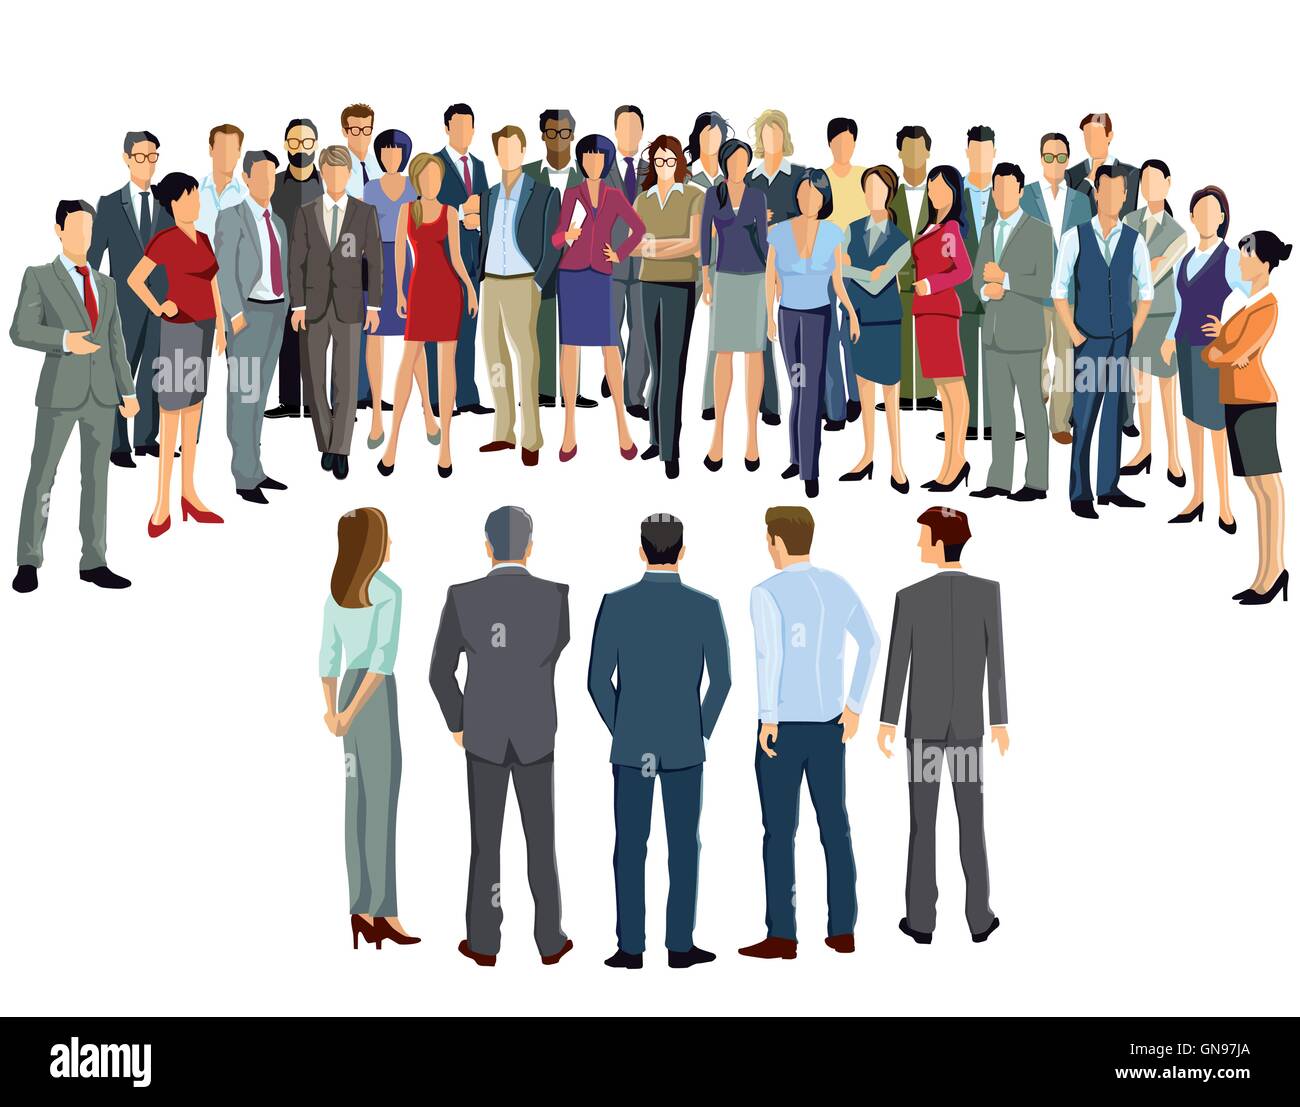 Business meeting participants Stock Vector